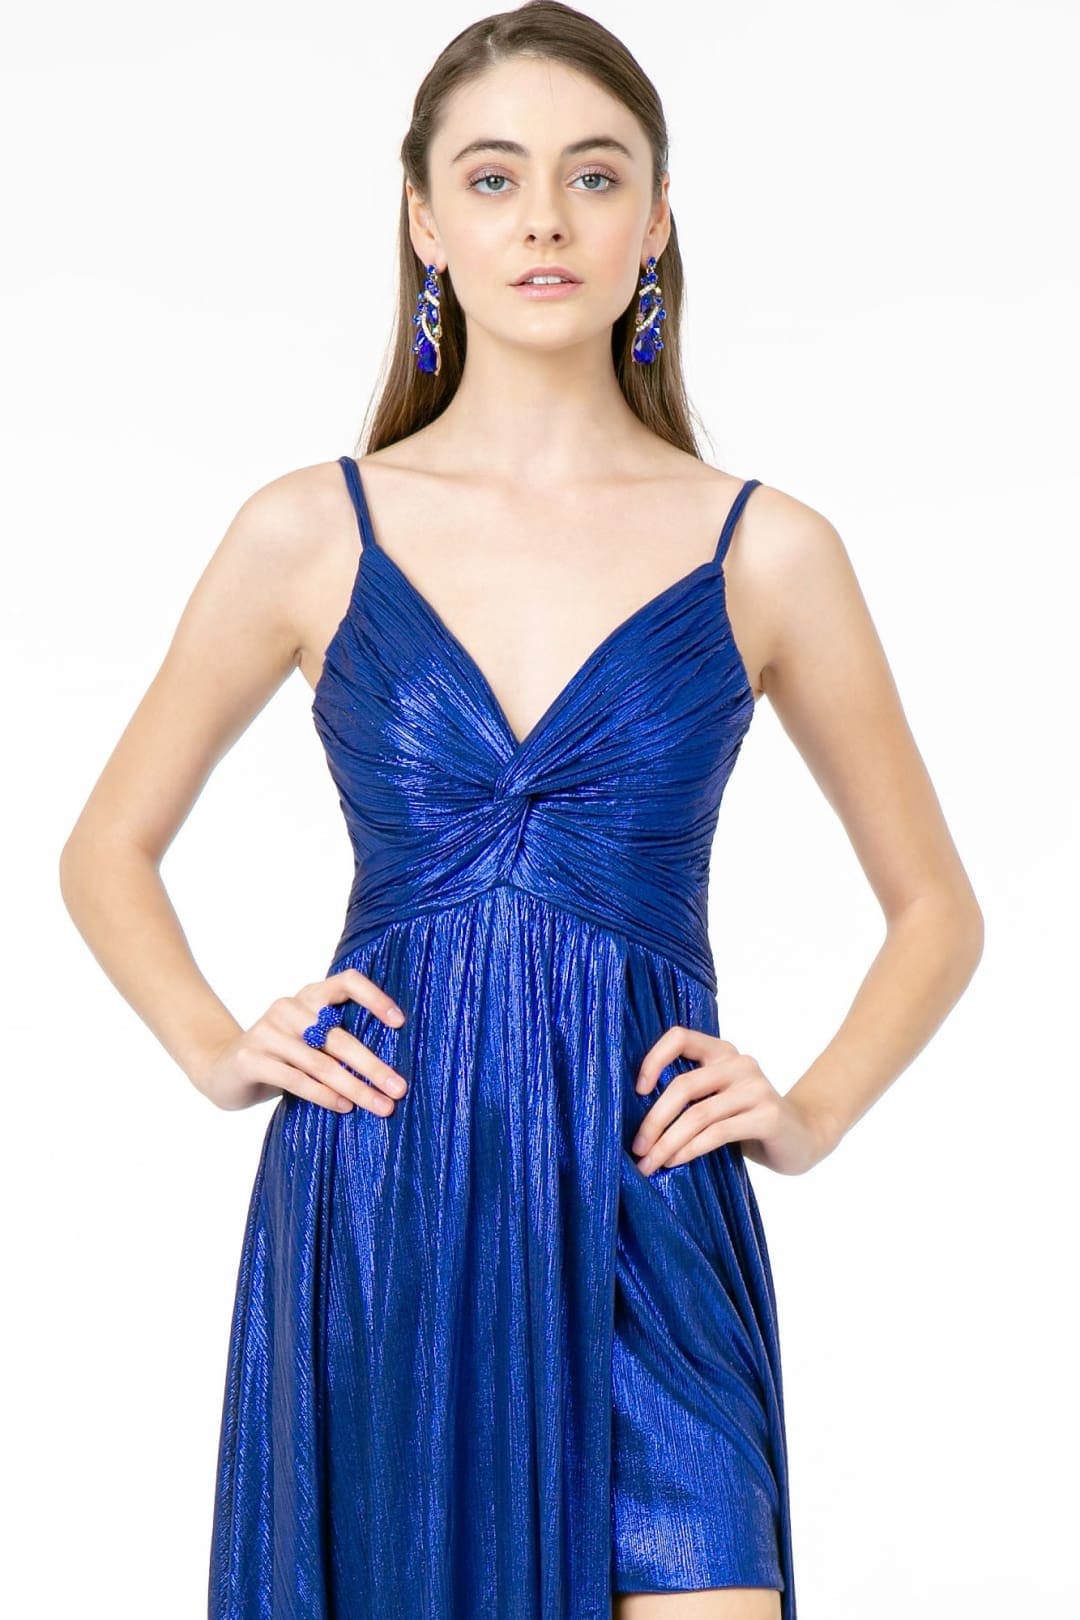 Formal Evening Gown - LAS2927